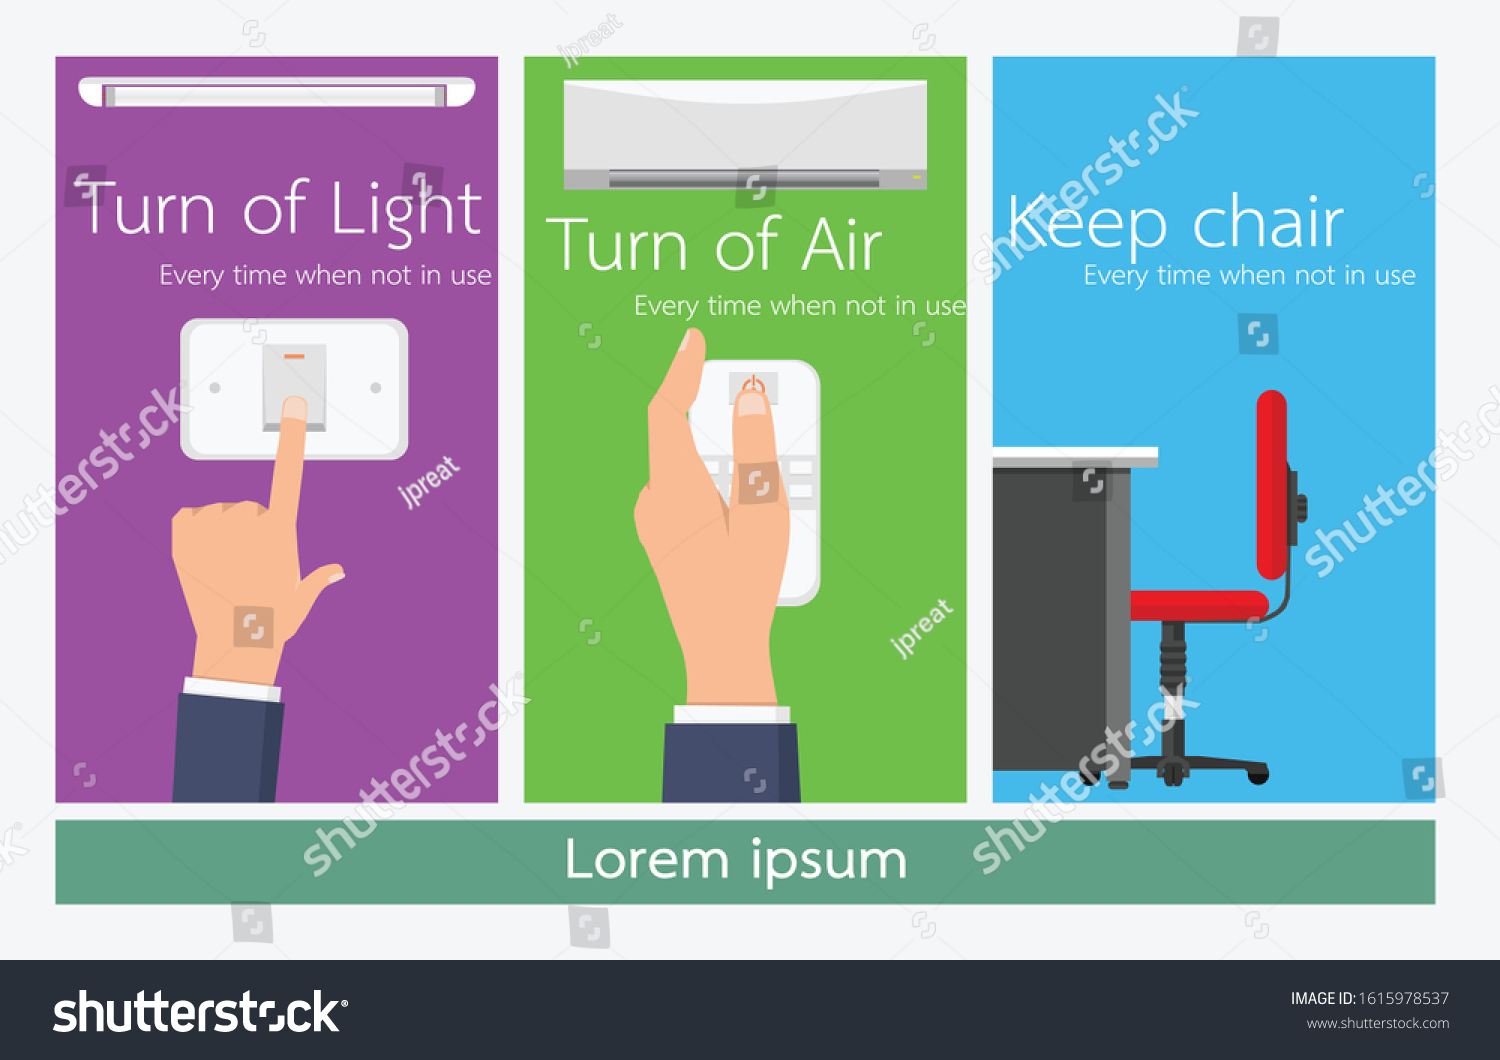 Turn off means. Turn off the Air Conditioner!. Turn off the Lights. Клипарт свет отключили. Клипартсвет отключидли.